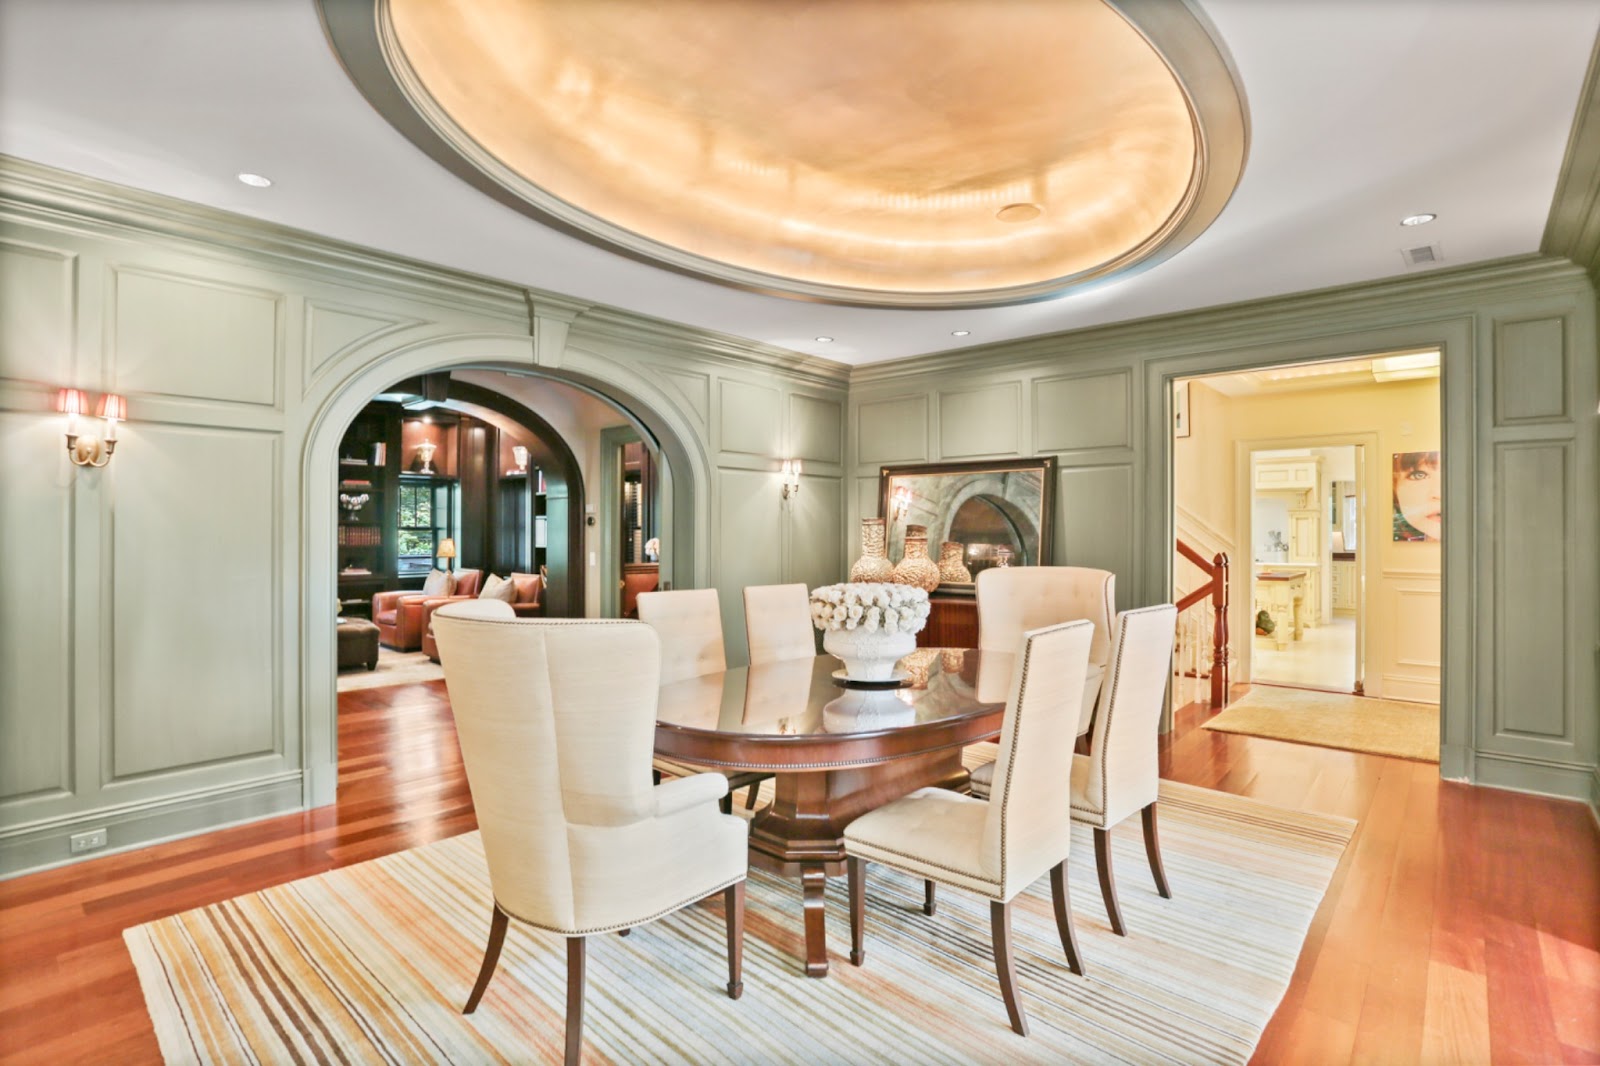 A custom painted paneled dining room in soft sage green features an oblong mahogany table, upholstered chairs and oval recessed ceiling.